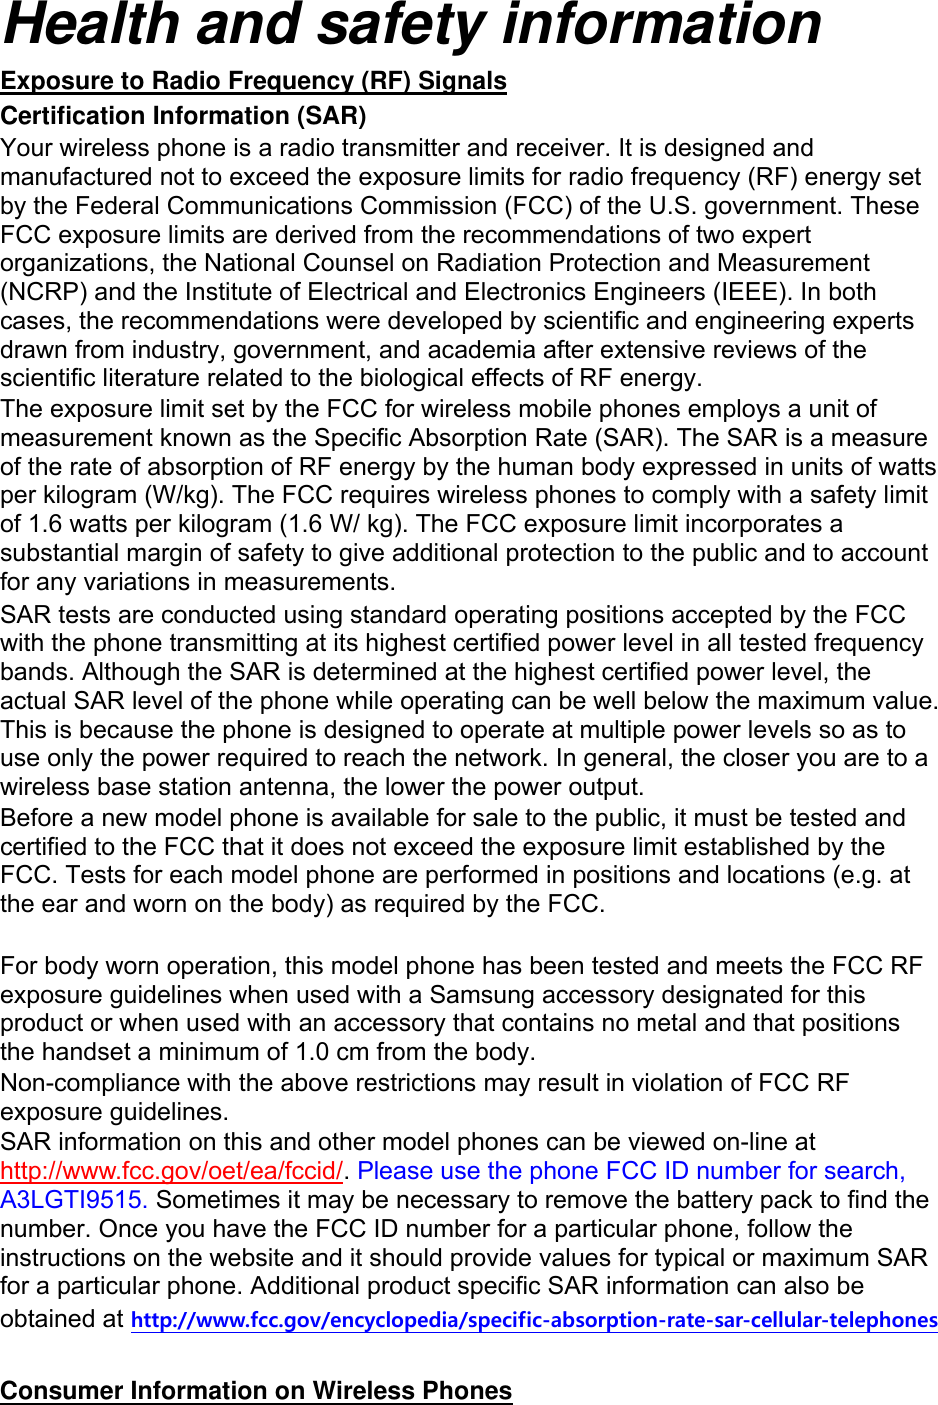 Health and safety information Exposure to Radio Frequency (RF) Signals Certification Information (SAR) Your wireless phone is a radio transmitter and receiver. It is designed and manufactured not to exceed the exposure limits for radio frequency (RF) energy set by the Federal Communications Commission (FCC) of the U.S. government. These FCC exposure limits are derived from the recommendations of two expert organizations, the National Counsel on Radiation Protection and Measurement (NCRP) and the Institute of Electrical and Electronics Engineers (IEEE). In both cases, the recommendations were developed by scientific and engineering experts drawn from industry, government, and academia after extensive reviews of the scientific literature related to the biological effects of RF energy. The exposure limit set by the FCC for wireless mobile phones employs a unit of measurement known as the Specific Absorption Rate (SAR). The SAR is a measure of the rate of absorption of RF energy by the human body expressed in units of watts per kilogram (W/kg). The FCC requires wireless phones to comply with a safety limit of 1.6 watts per kilogram (1.6 W/ kg). The FCC exposure limit incorporates a substantial margin of safety to give additional protection to the public and to account for any variations in measurements. SAR tests are conducted using standard operating positions accepted by the FCC with the phone transmitting at its highest certified power level in all tested frequency bands. Although the SAR is determined at the highest certified power level, the actual SAR level of the phone while operating can be well below the maximum value. This is because the phone is designed to operate at multiple power levels so as to use only the power required to reach the network. In general, the closer you are to a wireless base station antenna, the lower the power output. Before a new model phone is available for sale to the public, it must be tested and certified to the FCC that it does not exceed the exposure limit established by the FCC. Tests for each model phone are performed in positions and locations (e.g. at the ear and worn on the body) as required by the FCC.      For body worn operation, this model phone has been tested and meets the FCC RF exposure guidelines when used with a Samsung accessory designated for this product or when used with an accessory that contains no metal and that positions the handset a minimum of 1.0 cm from the body.   Non-compliance with the above restrictions may result in violation of FCC RF exposure guidelines. SAR information on this and other model phones can be viewed on-line at http://www.fcc.gov/oet/ea/fccid/. Please use the phone FCC ID number for search, A3LGTI9515. Sometimes it may be necessary to remove the battery pack to find the number. Once you have the FCC ID number for a particular phone, follow the instructions on the website and it should provide values for typical or maximum SAR for a particular phone. Additional product specific SAR information can also be obtained at http://www.fcc.gov/encyclopedia/specific-absorption-rate-sar-cellular-telephones  Consumer Information on Wireless Phones 